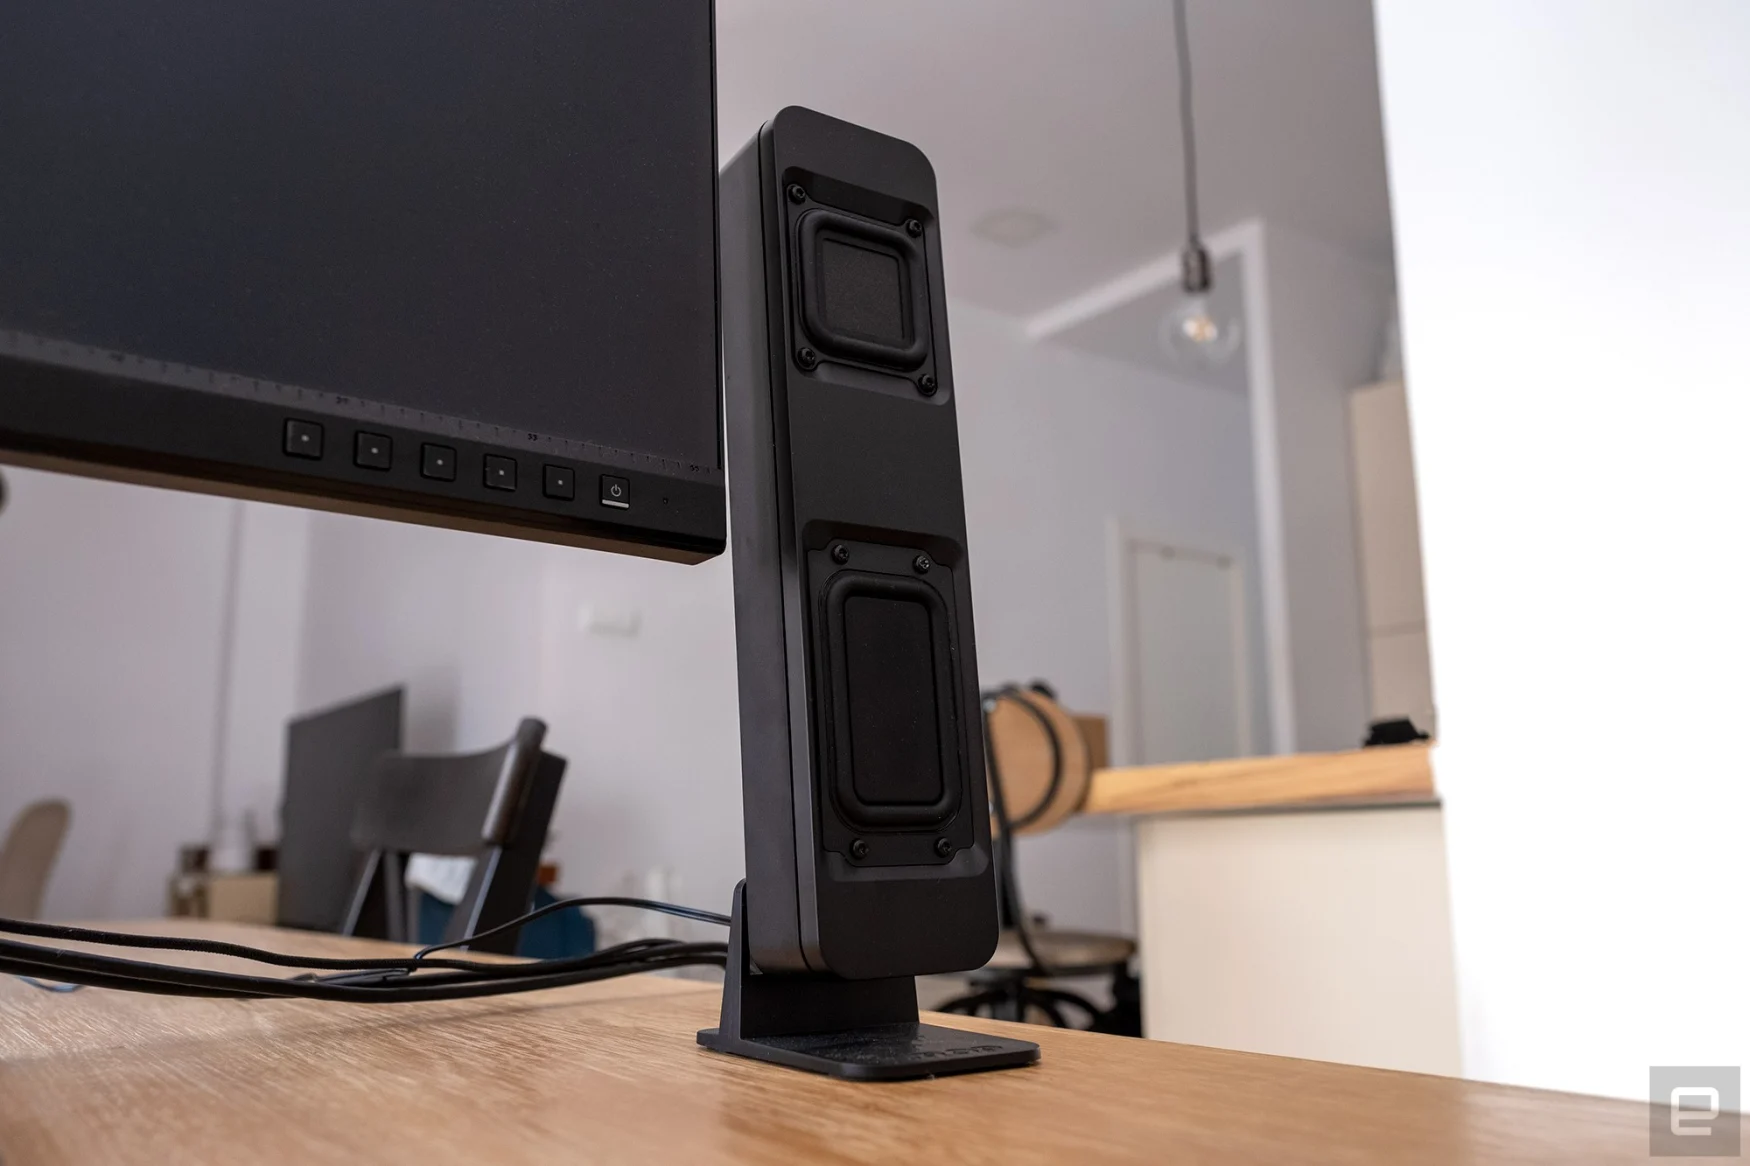 A Drop BMR1 speaker pictured next to a PC monitor.